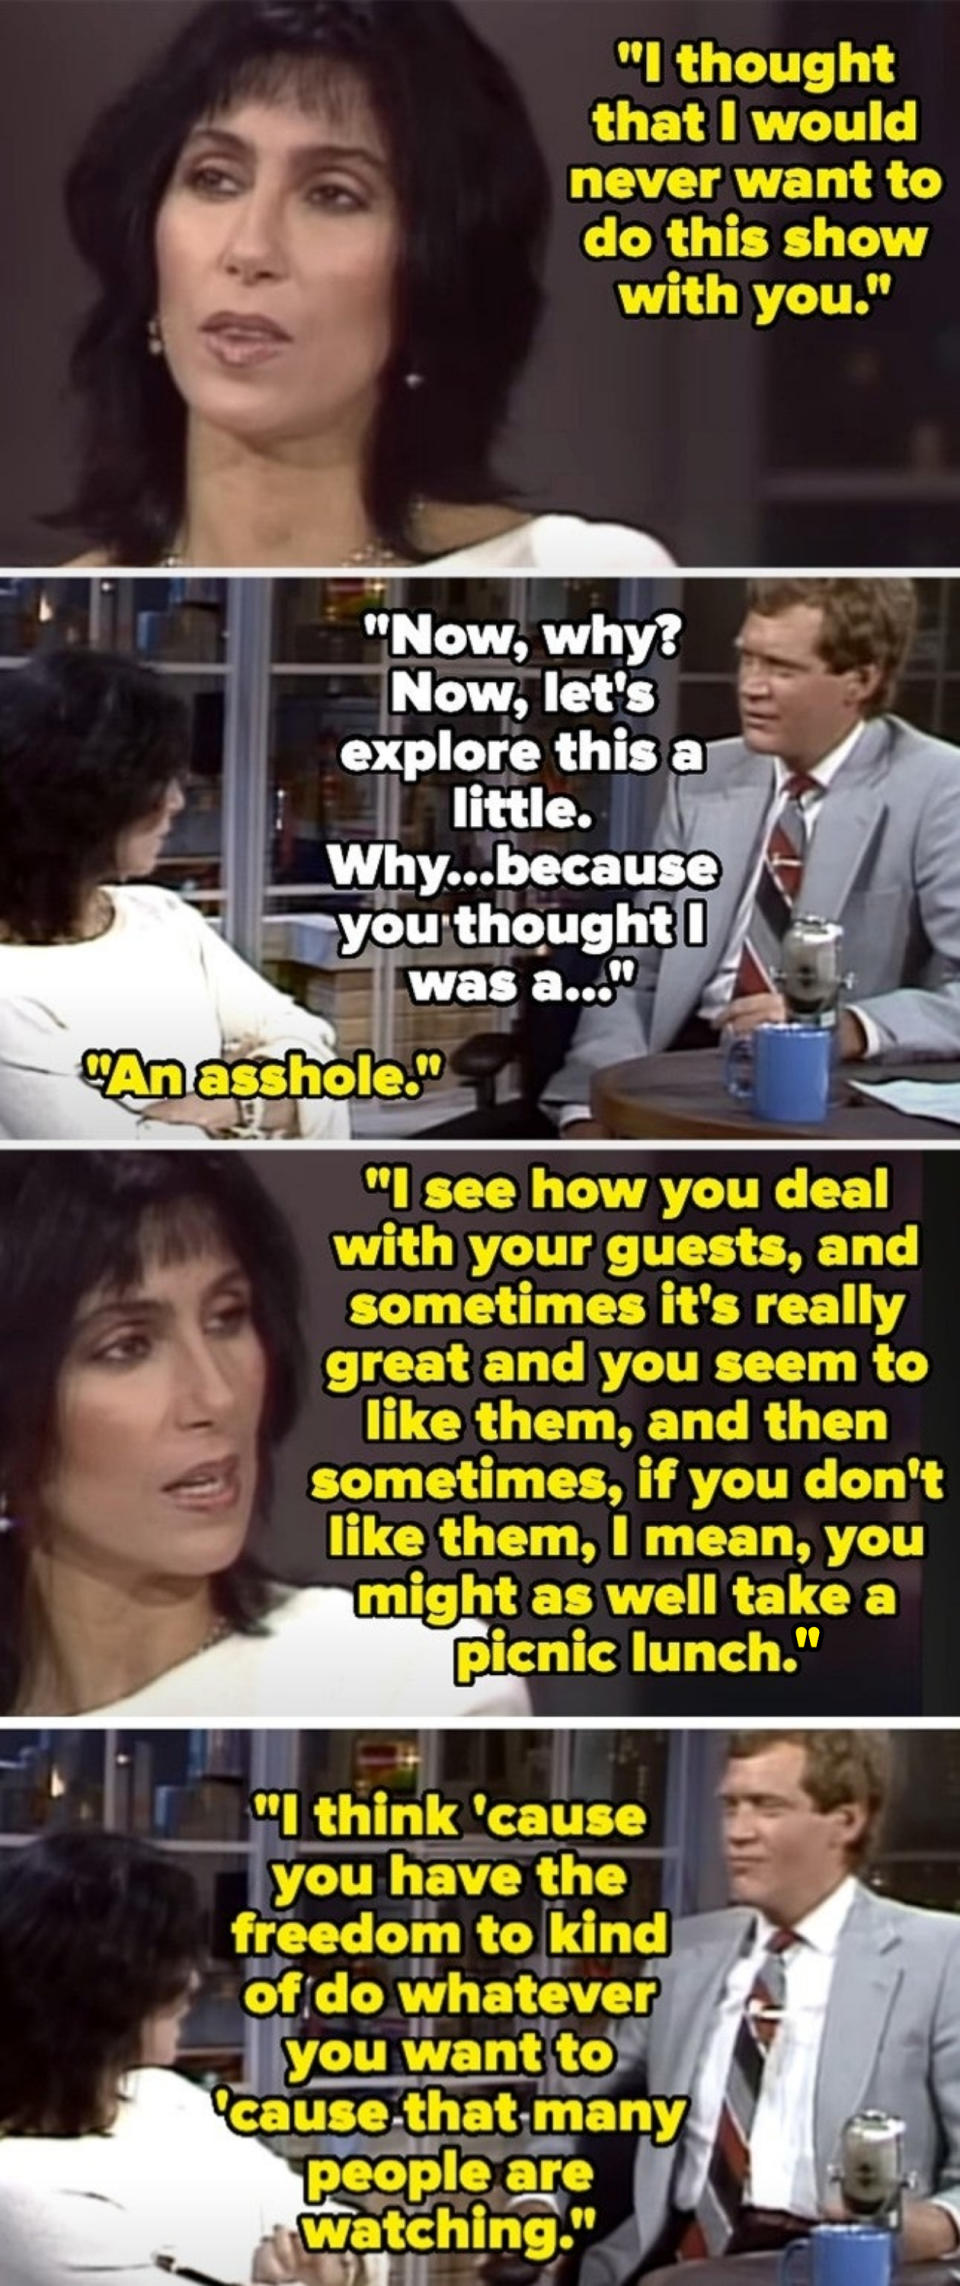 Cher in an interview with David Letterman. Cher says she thought she'd never do the show, referring to Letterman as "an asshole," and explains her comment